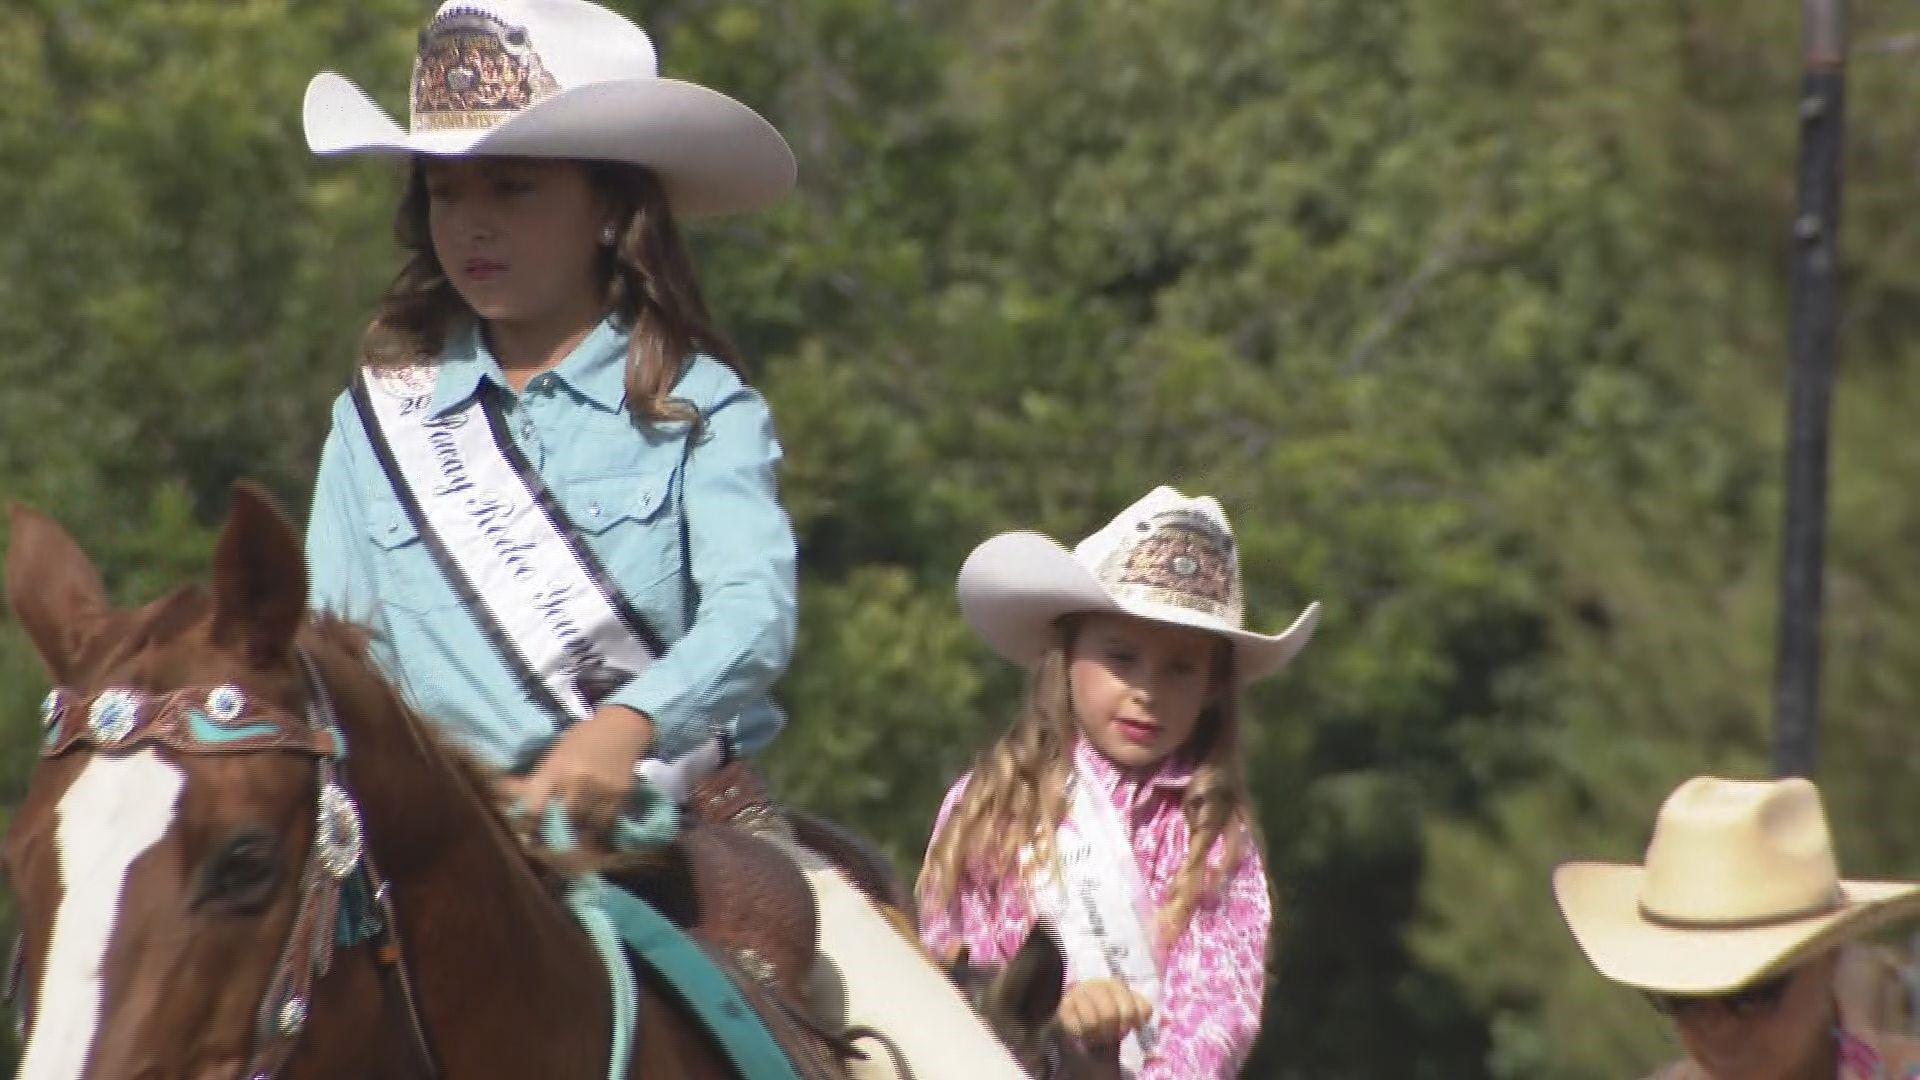 In this Zevely Zone, Jeff talks to two of the most popular girls at the Poway Rodeo.